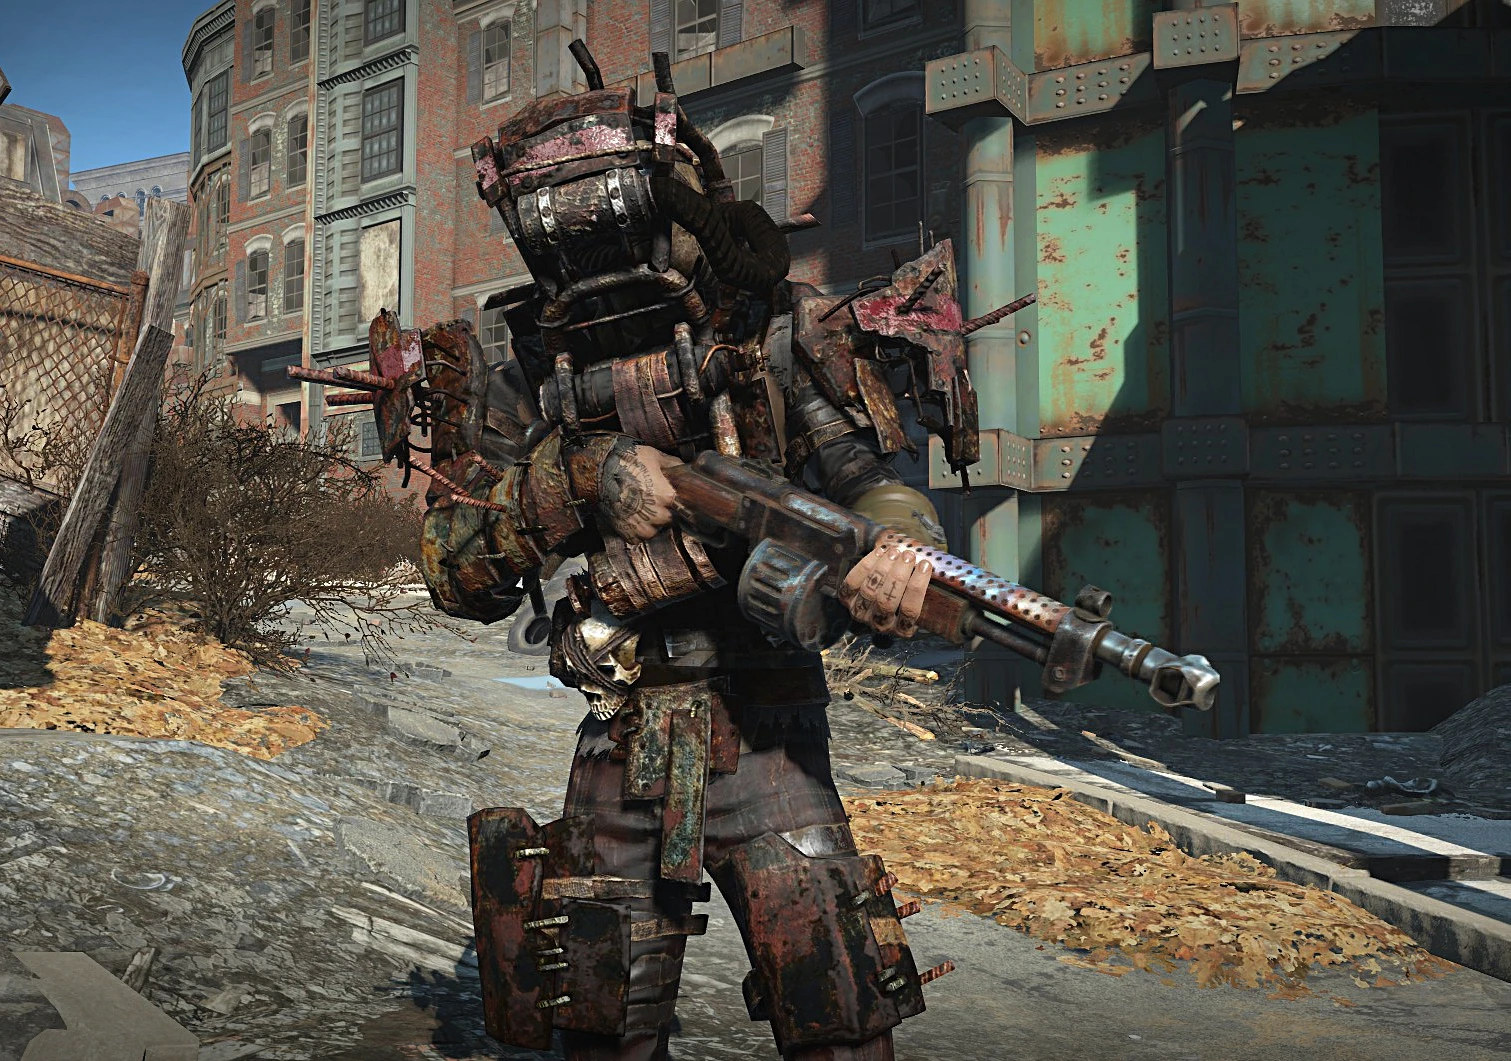 Hd Raider Armor At Fallout 4 Nexus Mods And Community free images, download...